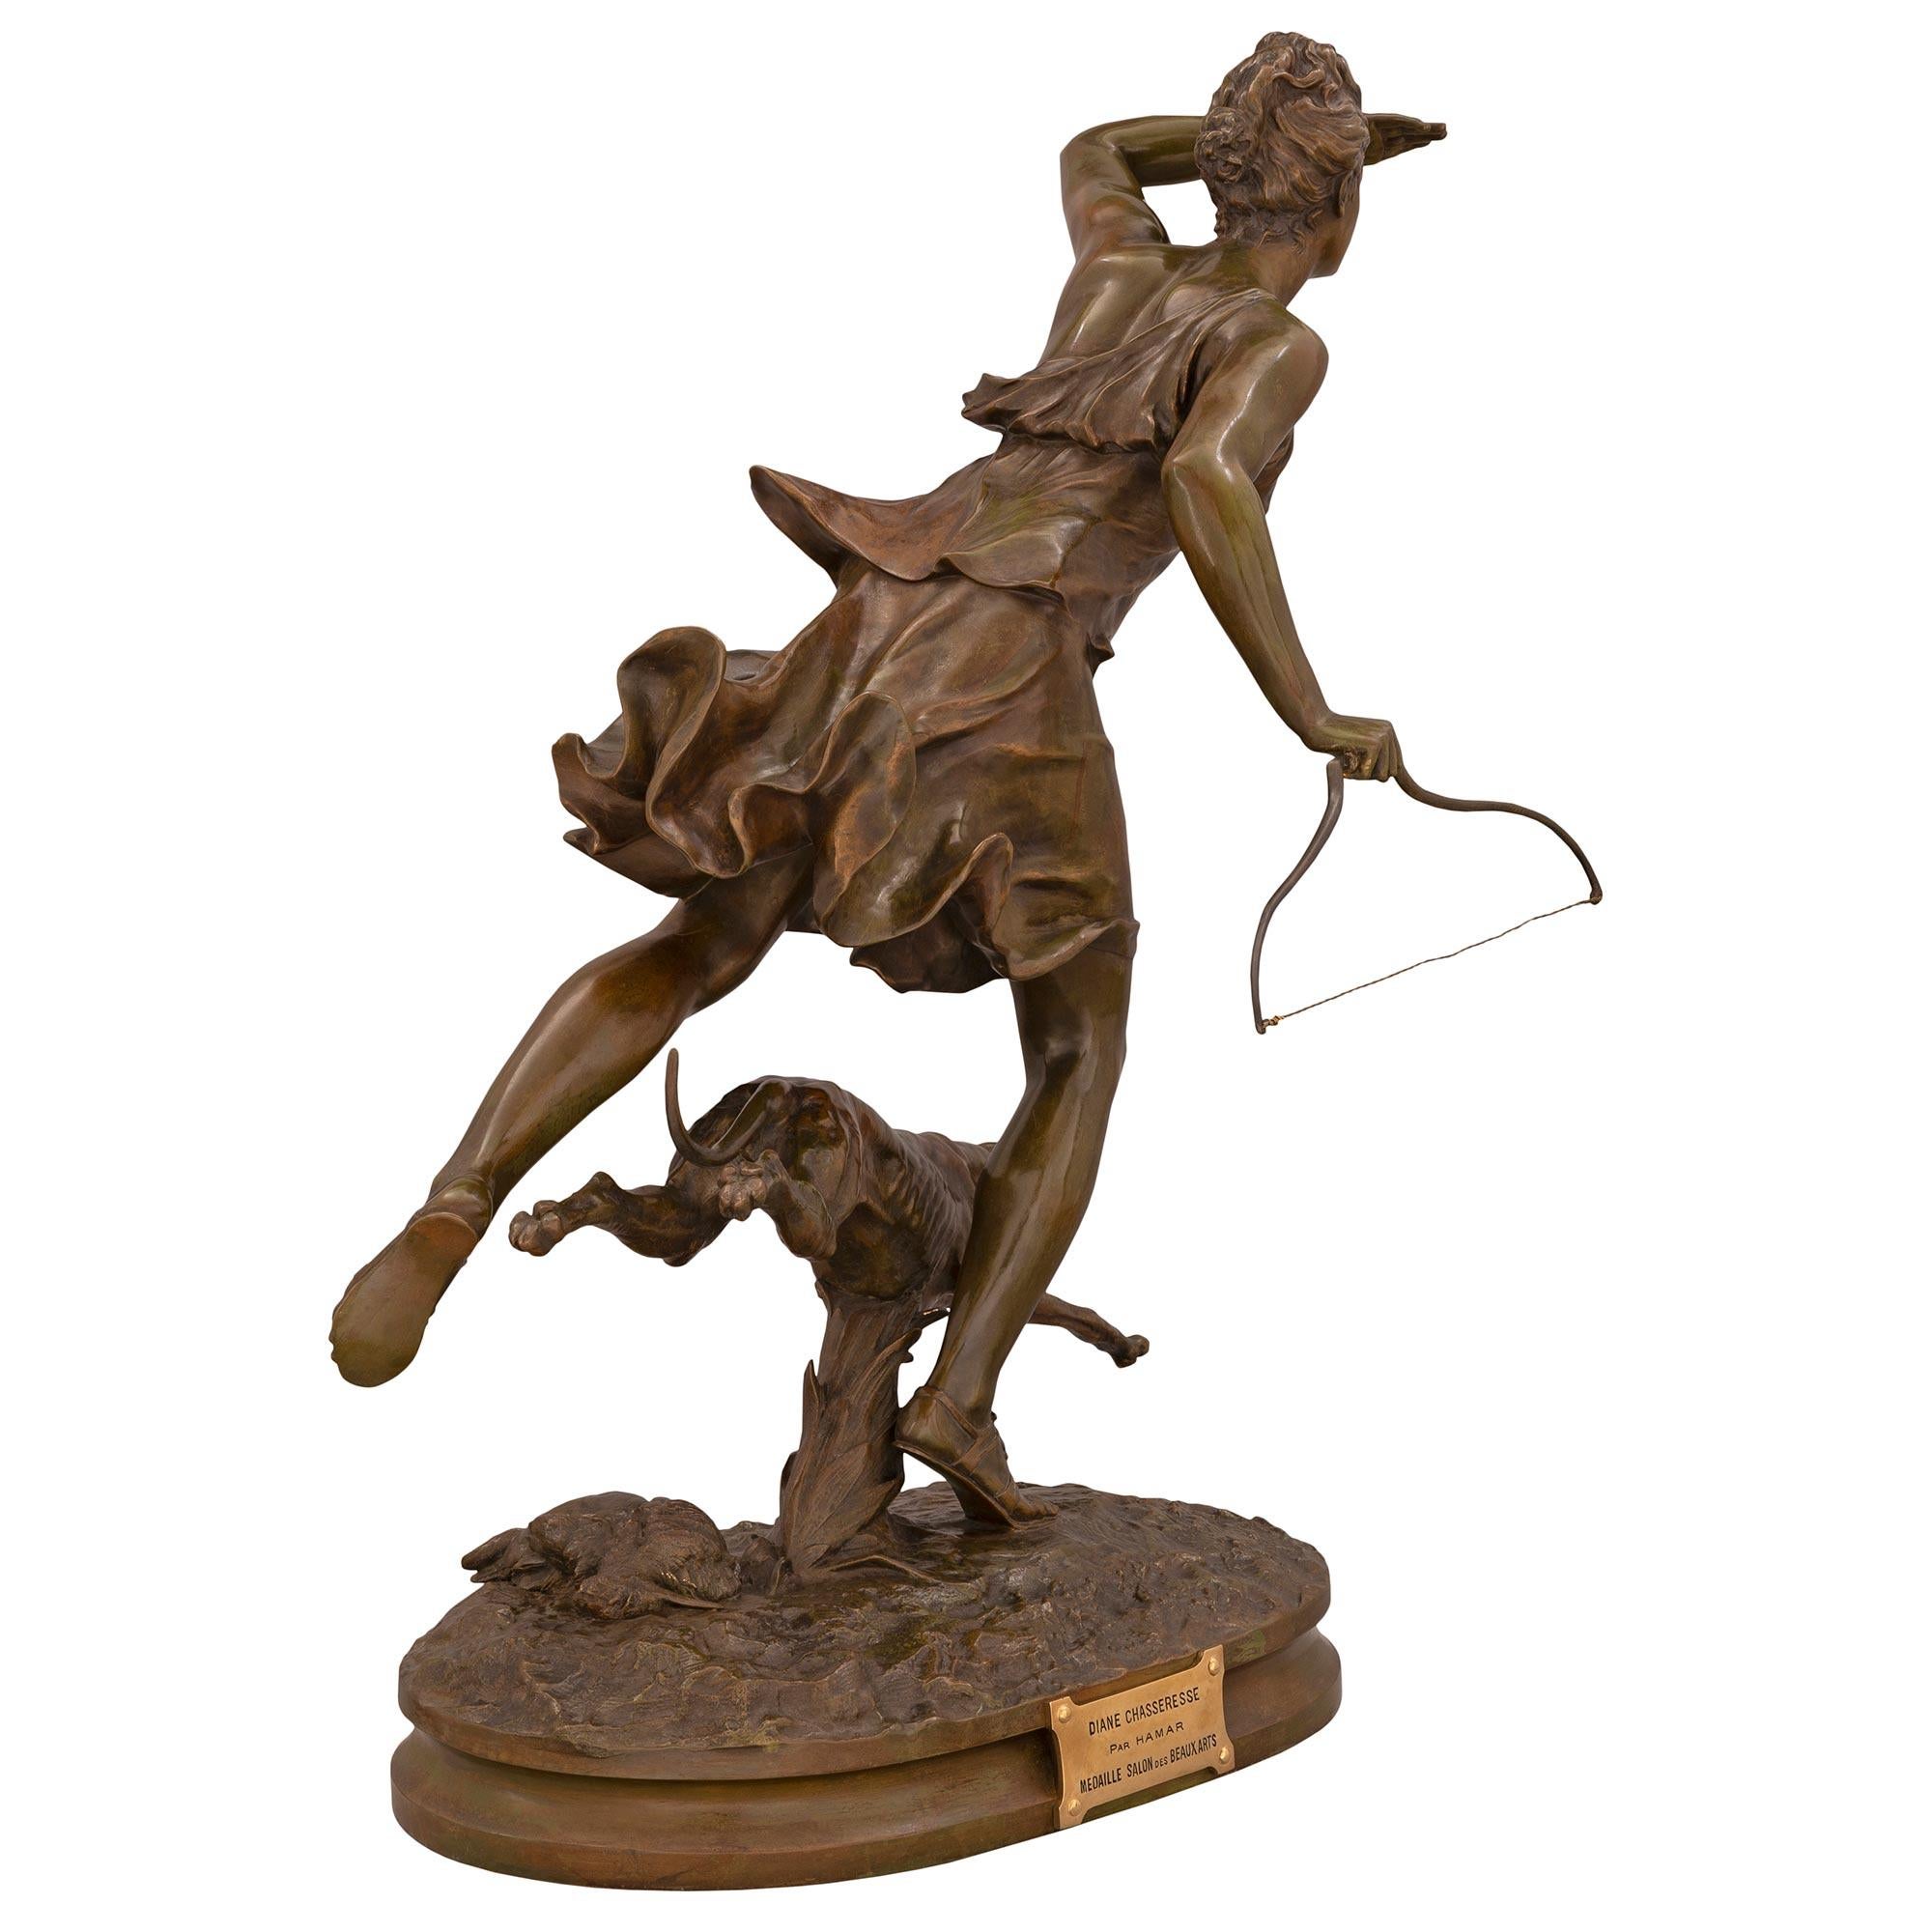 A stunning French turn-of-the-century Louis XVI st. patinated bronze and ormolu statue of Diana the Huntress and her dog, signed F. Hamar. The statue is raised by an elegant oblong base with a fine mottled border and a wonderfully executed ground